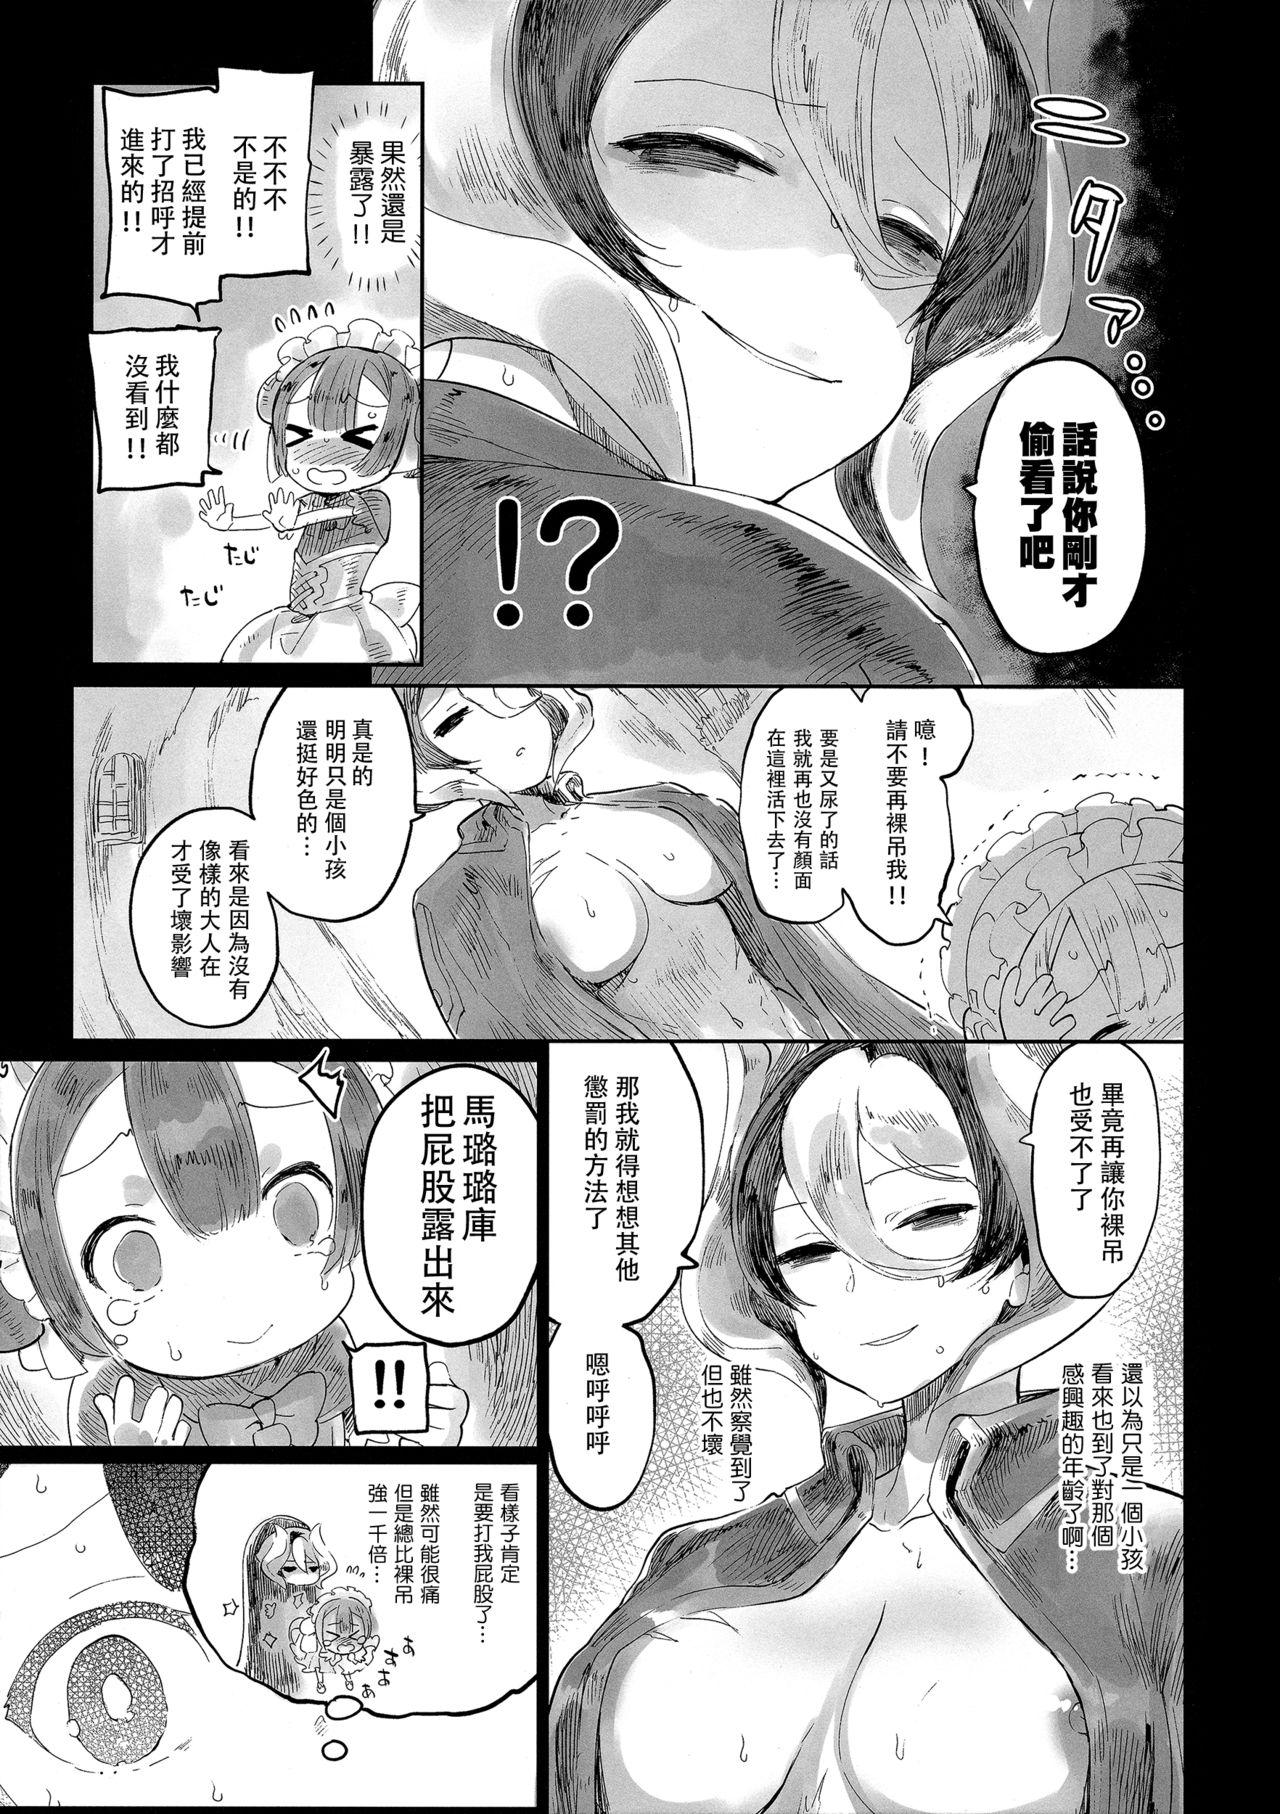 Negra Doshigatai Shitei - Made in abyss Best Blowjob - Page 13